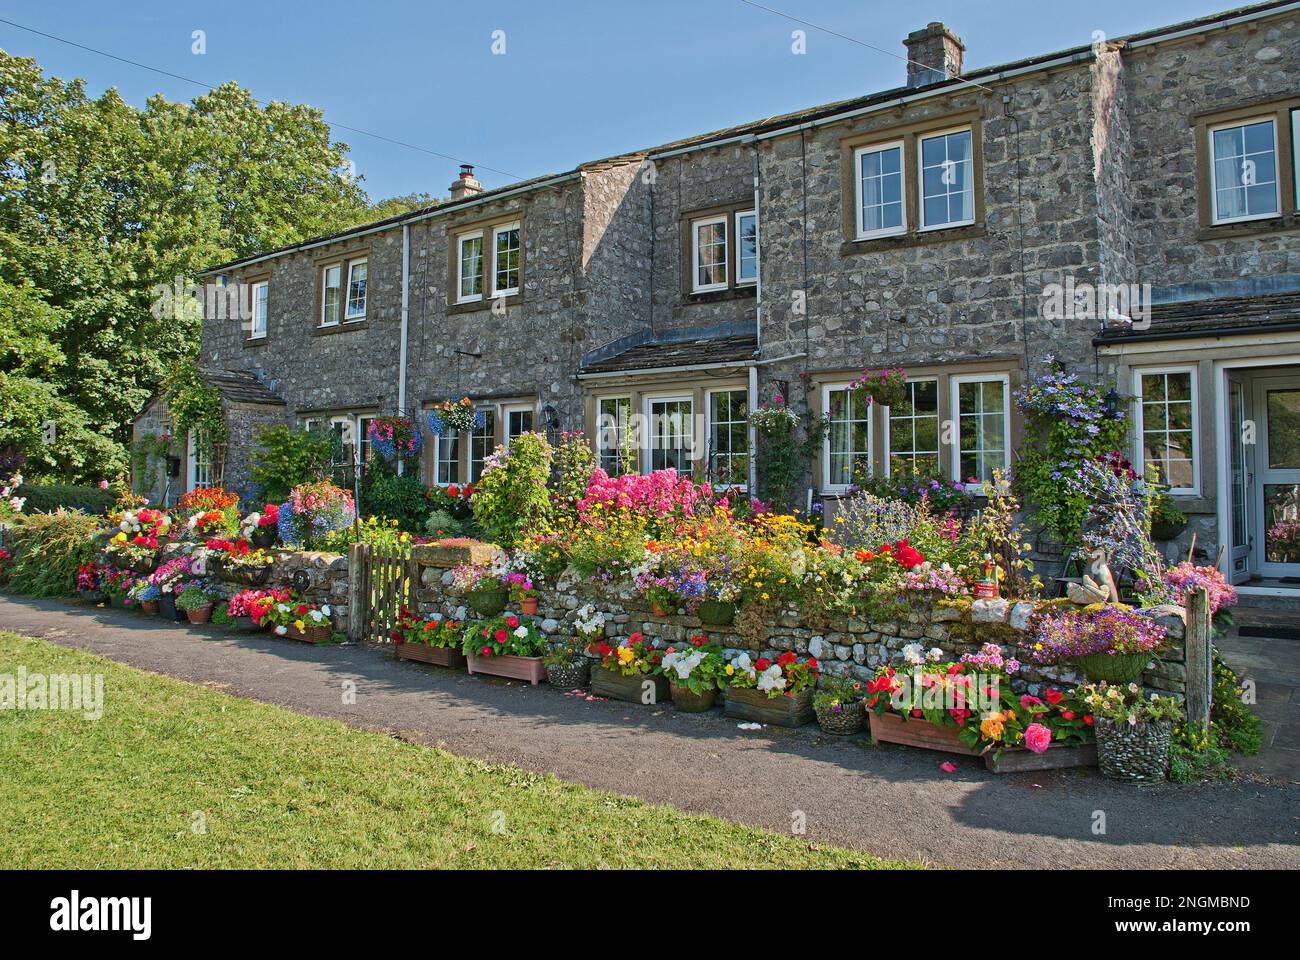 An amazing display  of flowers at Langcliffe Garth, Kettlewel,Yorkshire Dales seems to coincide well with the annual Scarecrow Festival. Stock Photo